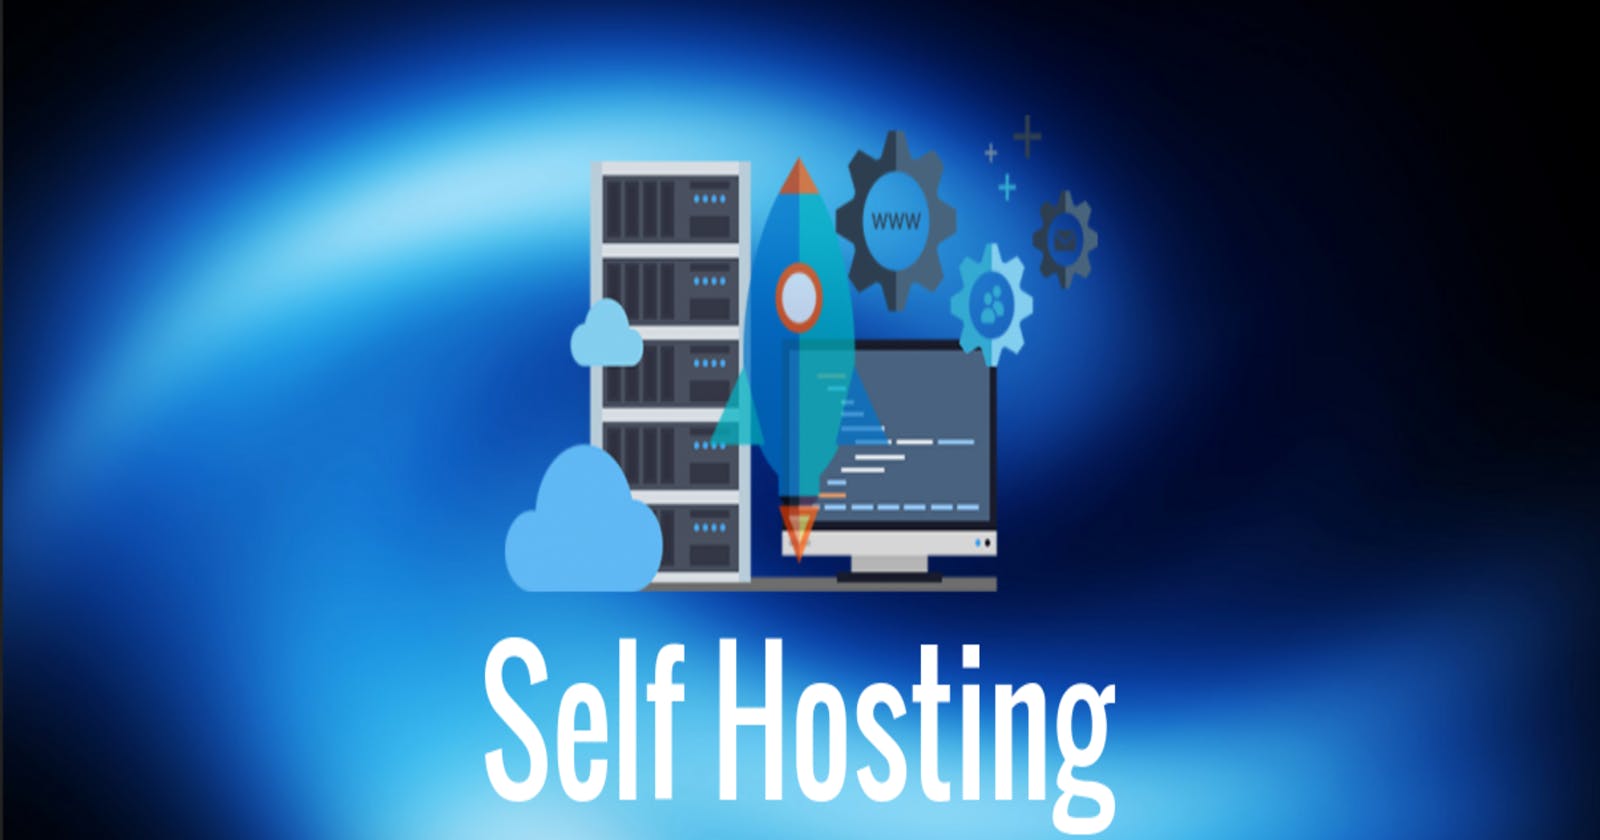 Self-Hosting: A DevOps Perspective on Taking Control of Your Tech